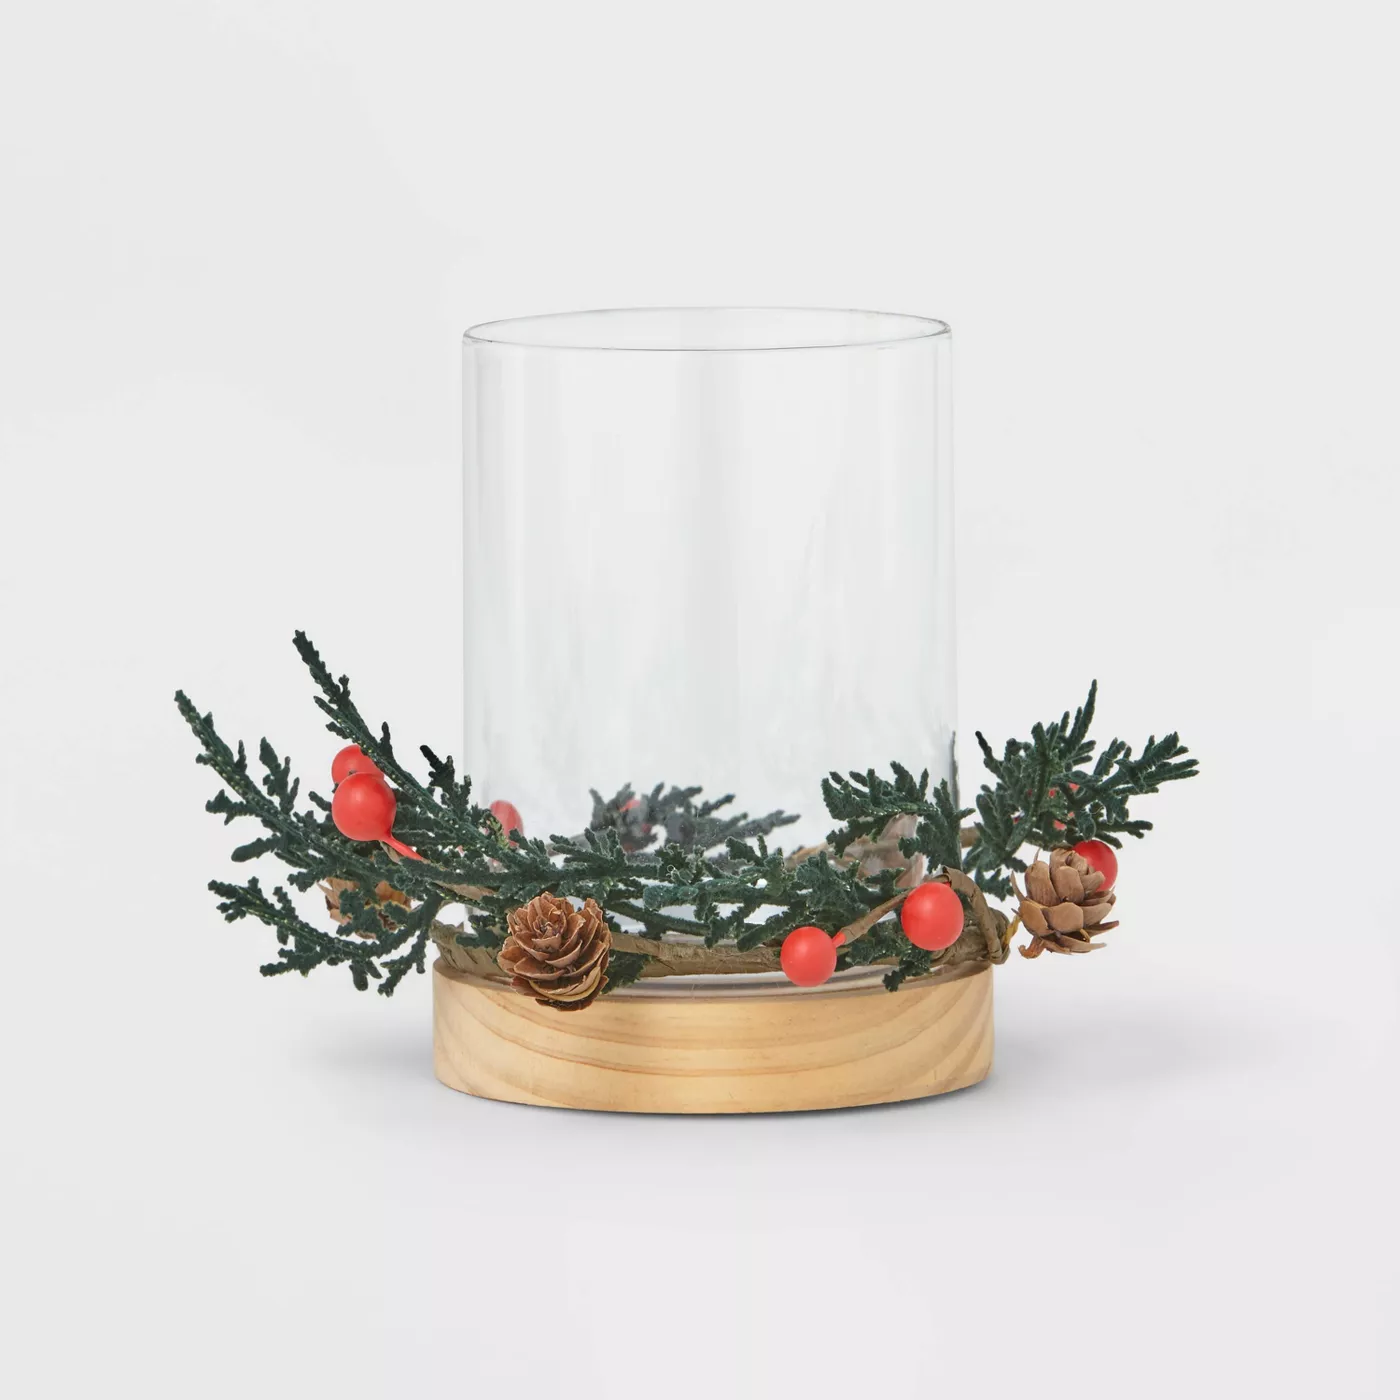 Small Glass Candle Holder with Berries - Wondershop™ - image 1 of 2